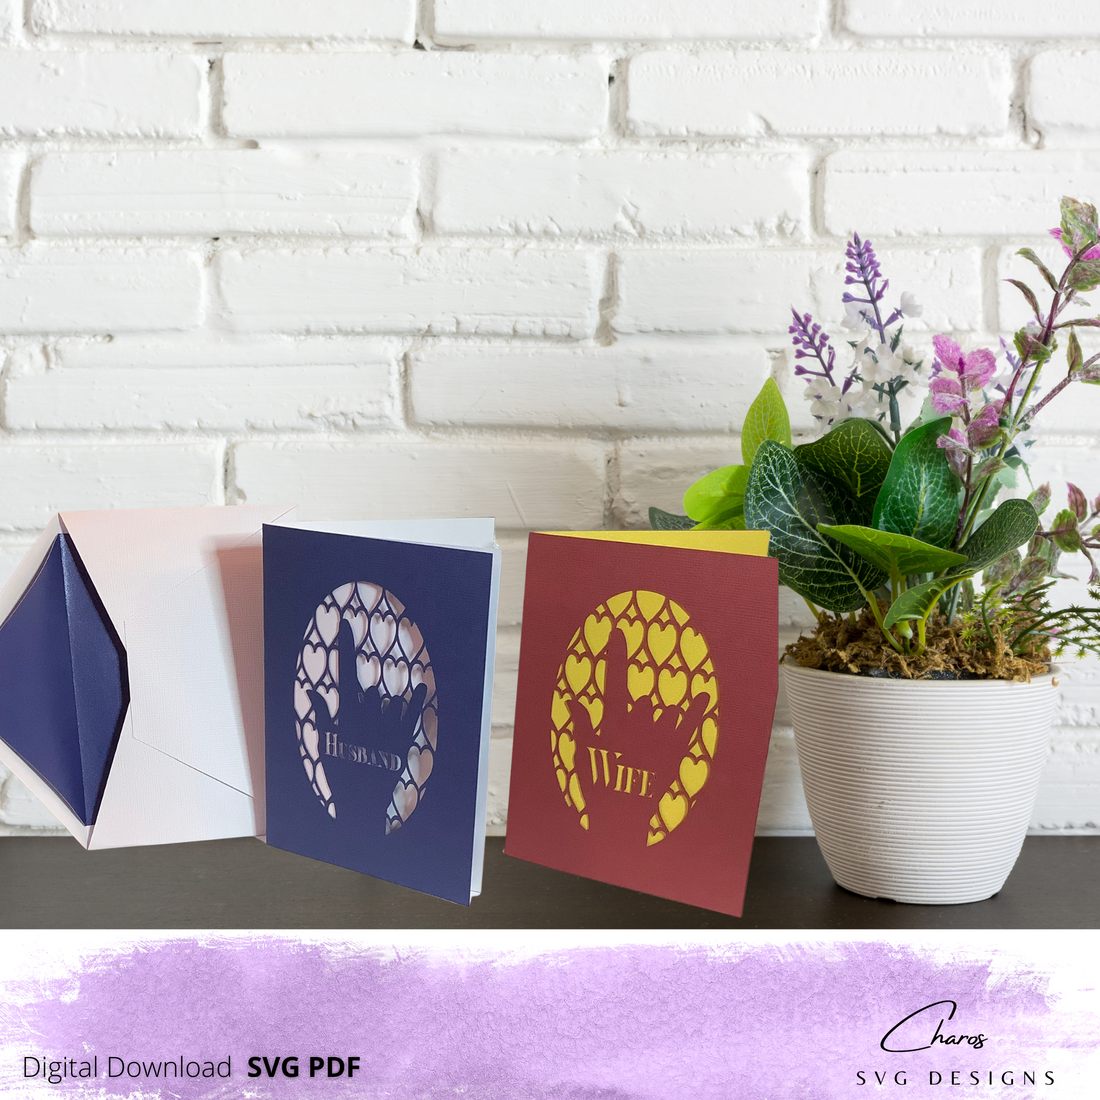 SVG: I Love You Heart Wife and Husband (in Sign Language) Greeting Card w/ Free Envelope SVG | All Occasions Card SVG | Signs | Greeting